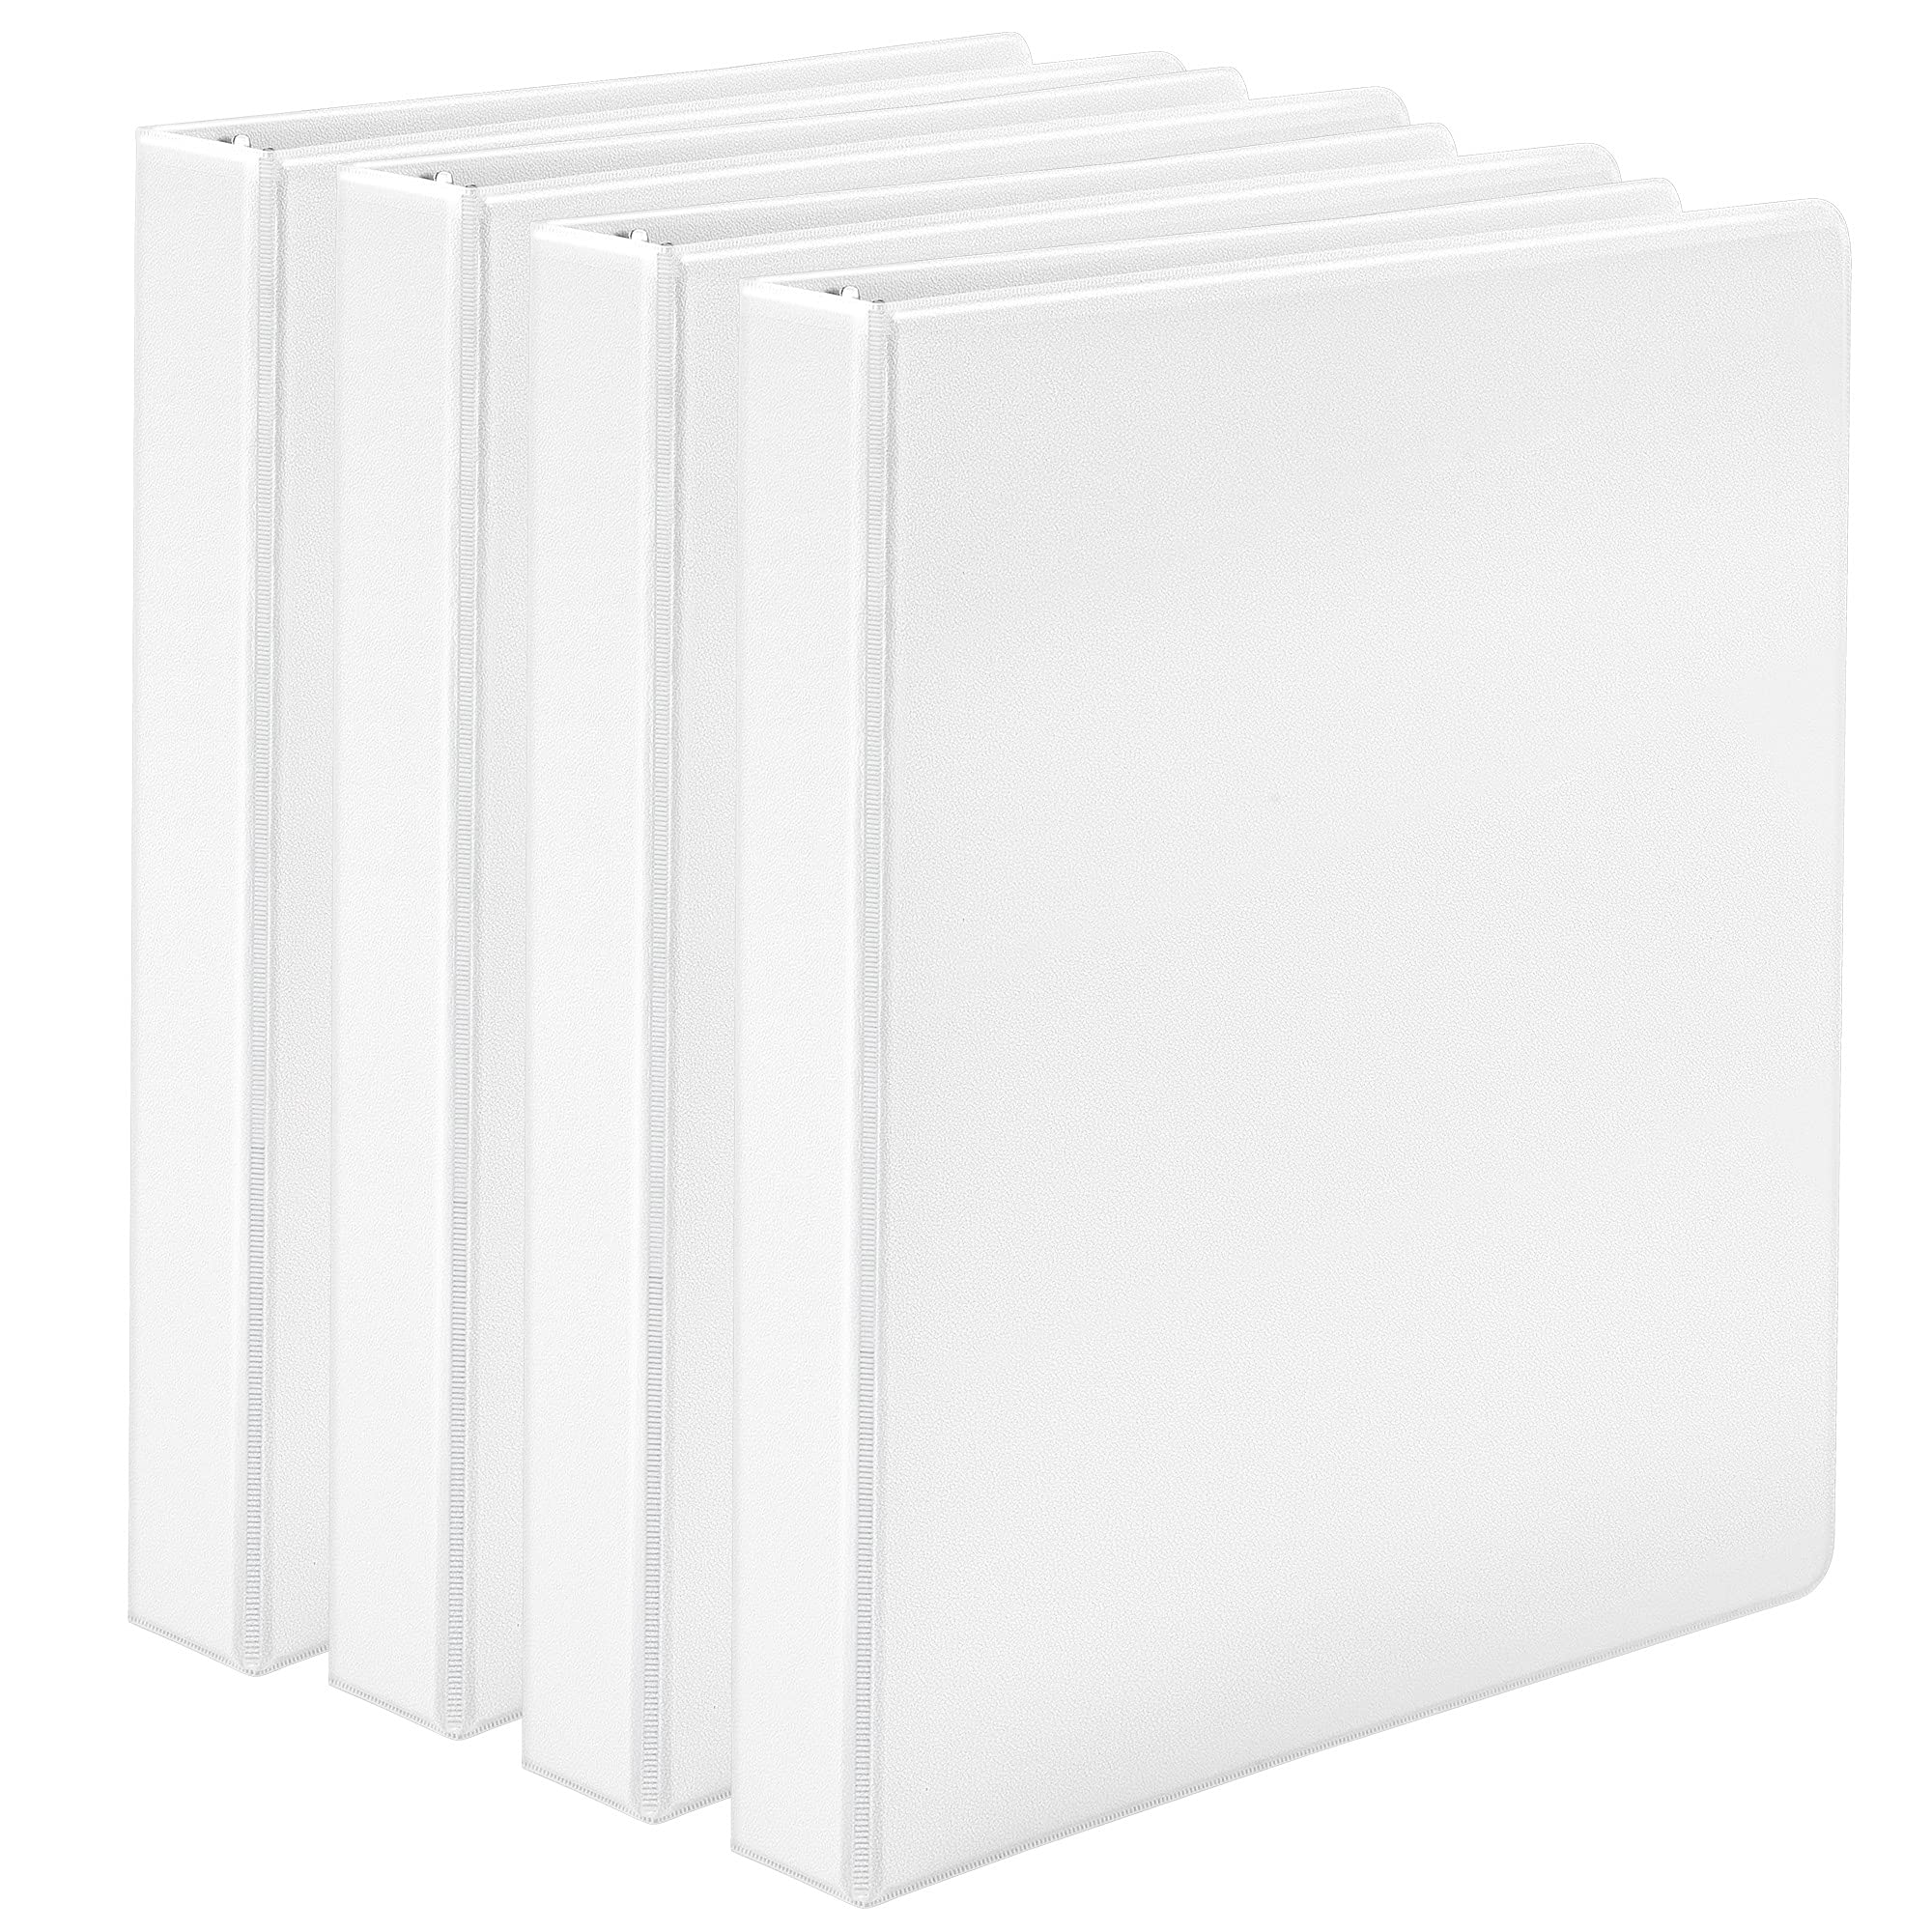 Book Cover Amazon Basics 3 Ring Binder with 1 Inch D-Ring and Clear Overlay, White, Pack of 4 1-inch 4-Pack